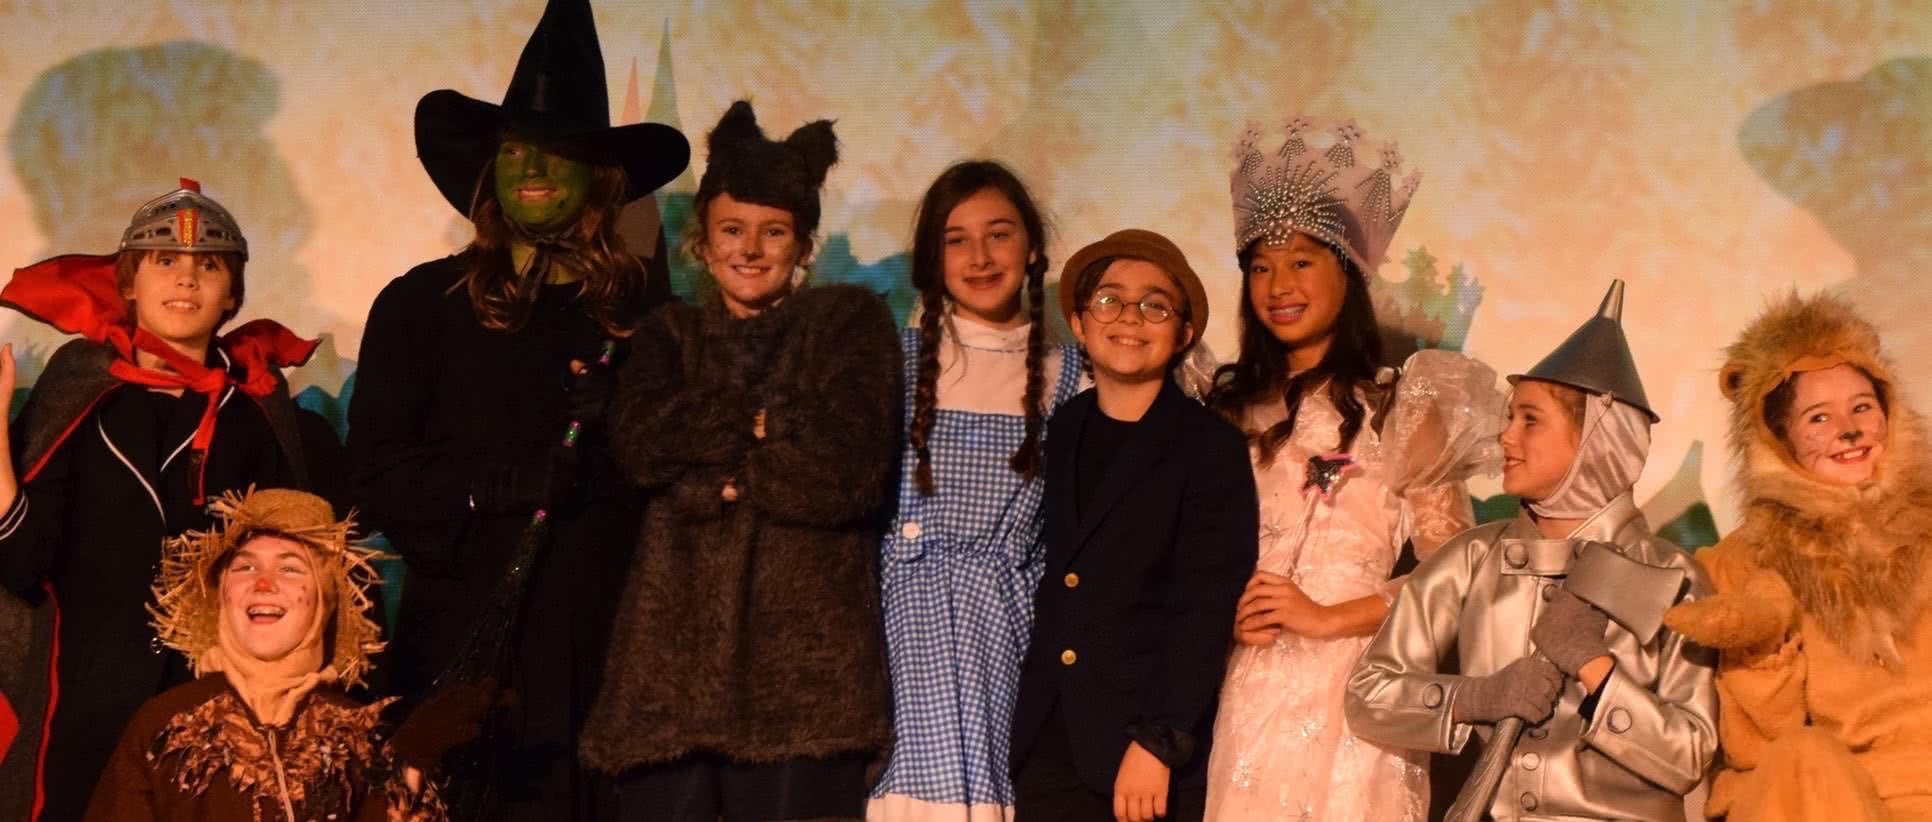 Tomorrow Youth Rep Banner image, from The Wizard of Oz, 2014